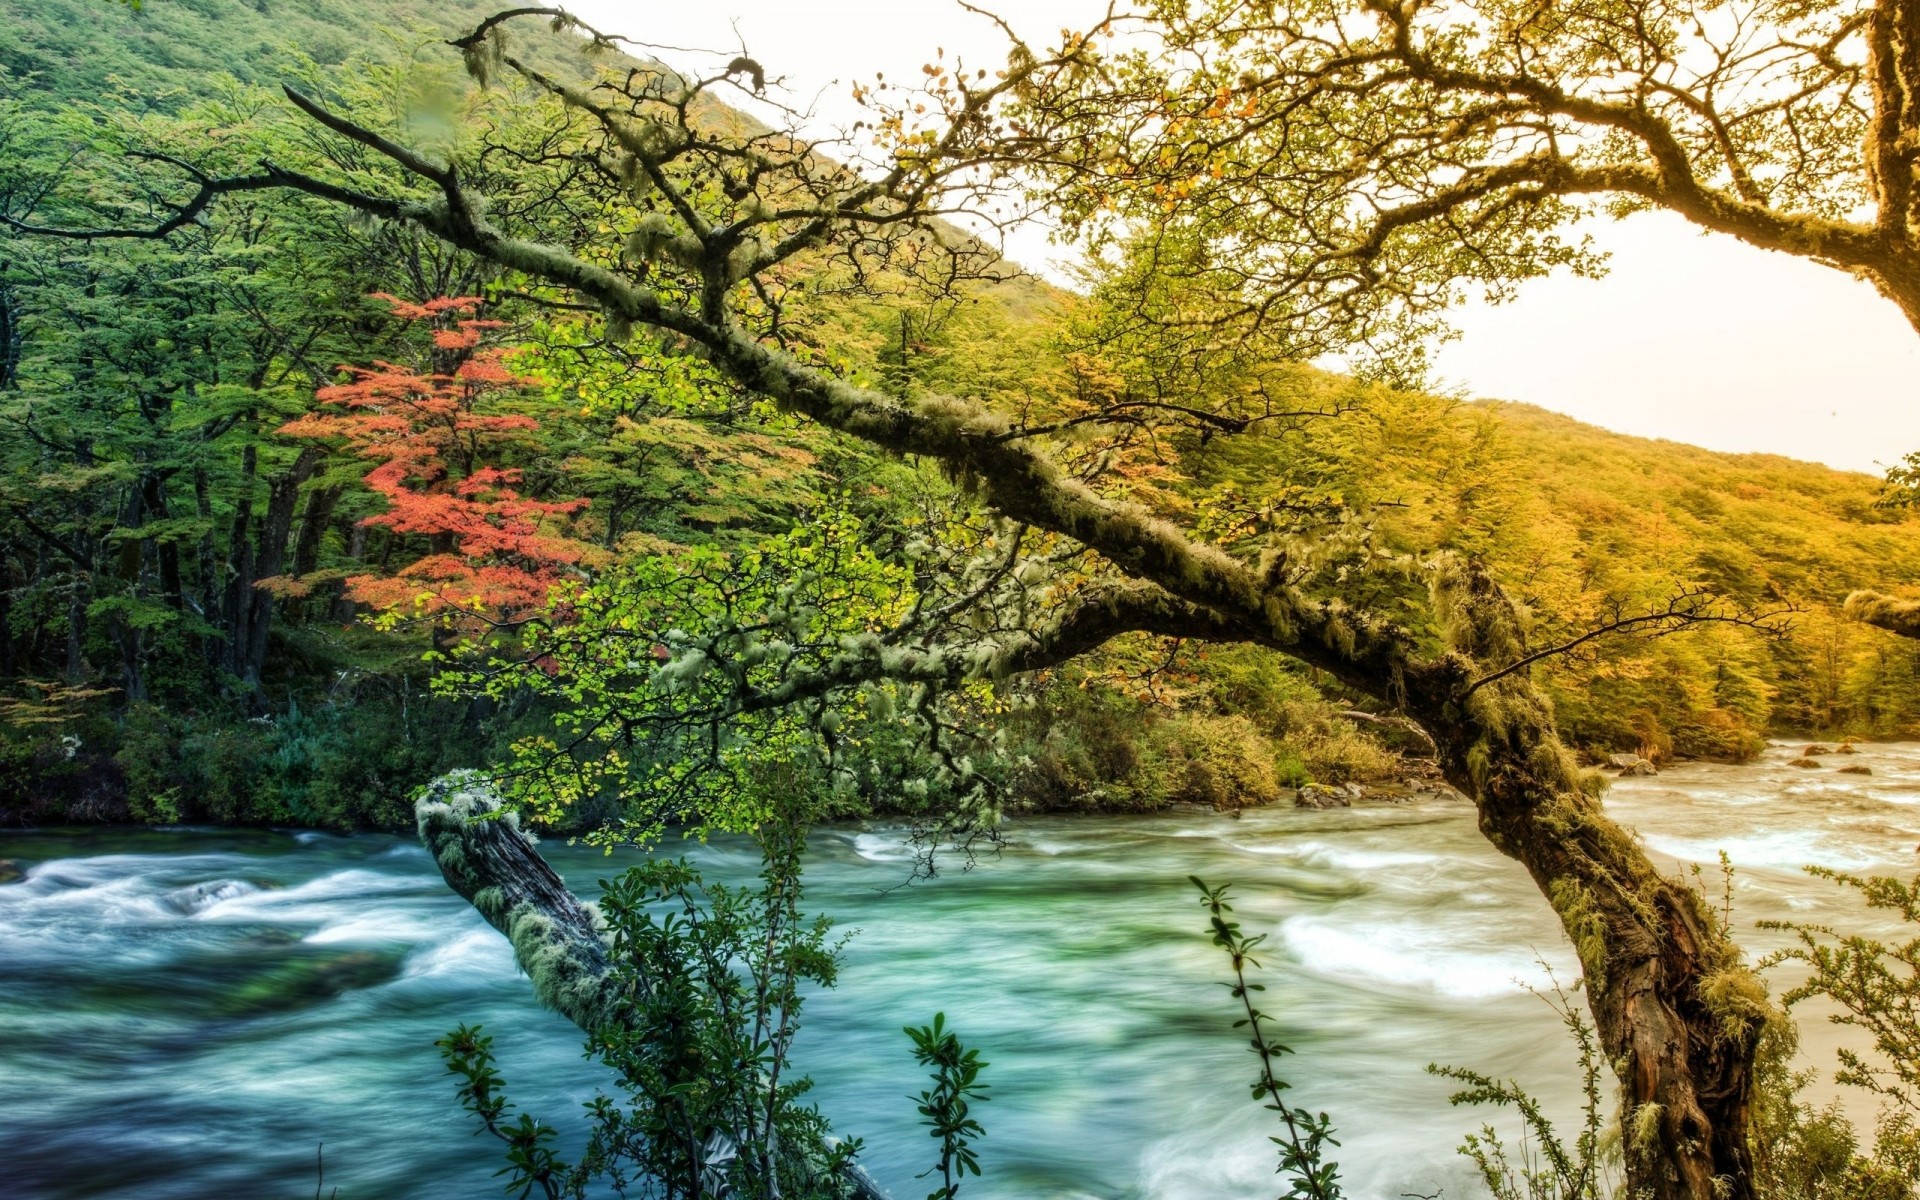 space nature water landscape tree wood fall river leaf scenic outdoors scenery stream season travel environment park lake summer mountain hdr poster hdr background hdr landscape hdr pics hi res hdr